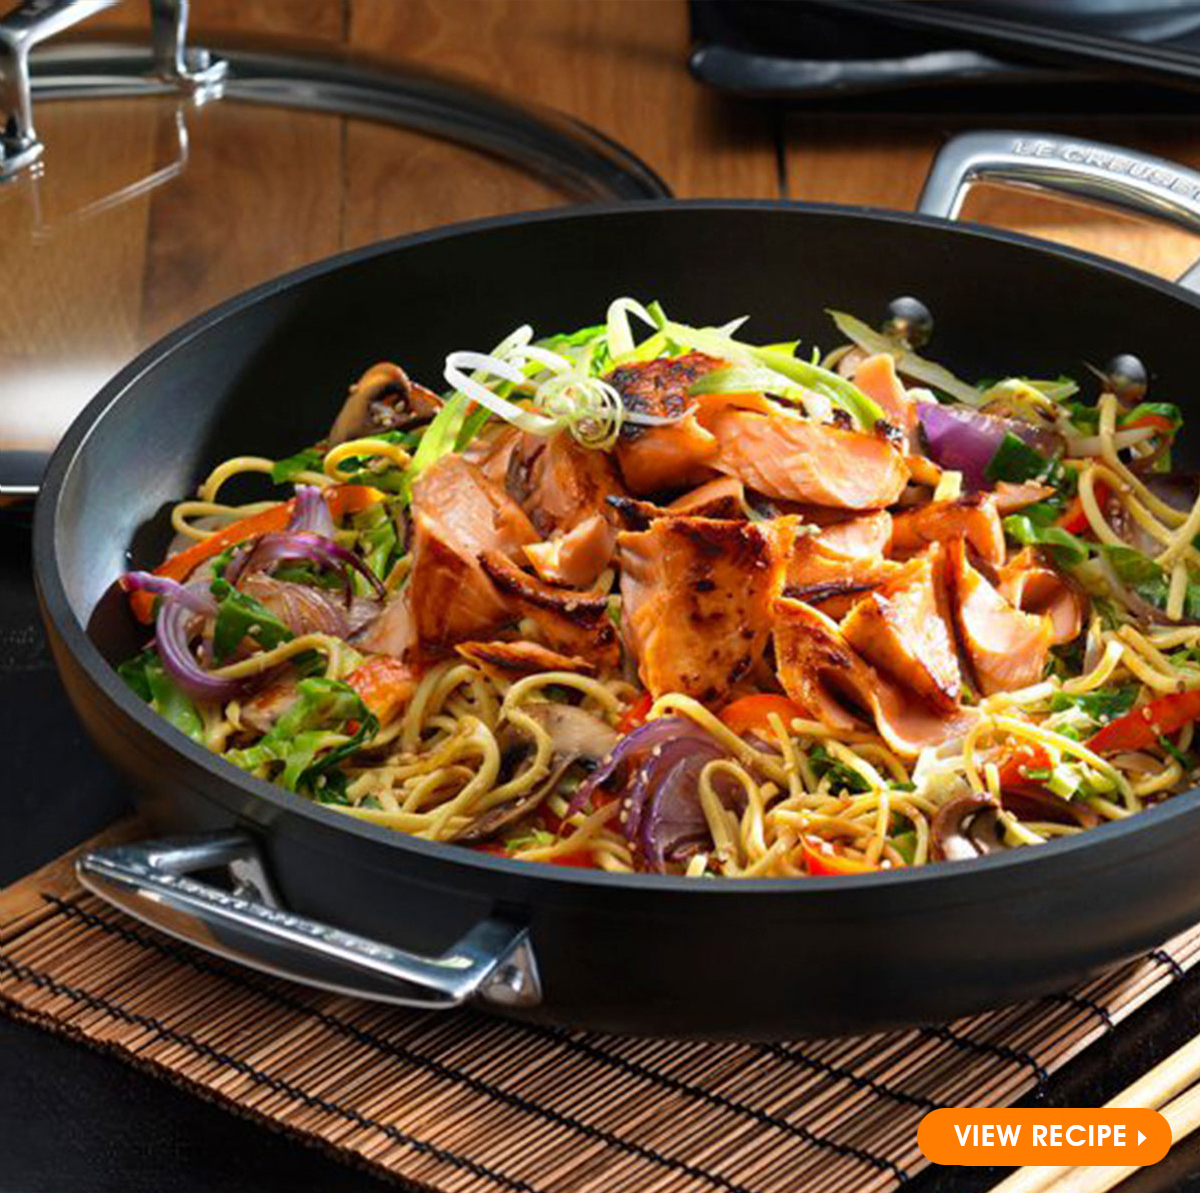 Seared Teriyaki Salmon with Stir Fried Vegetables and Noodles | Le Creuset  Recipes